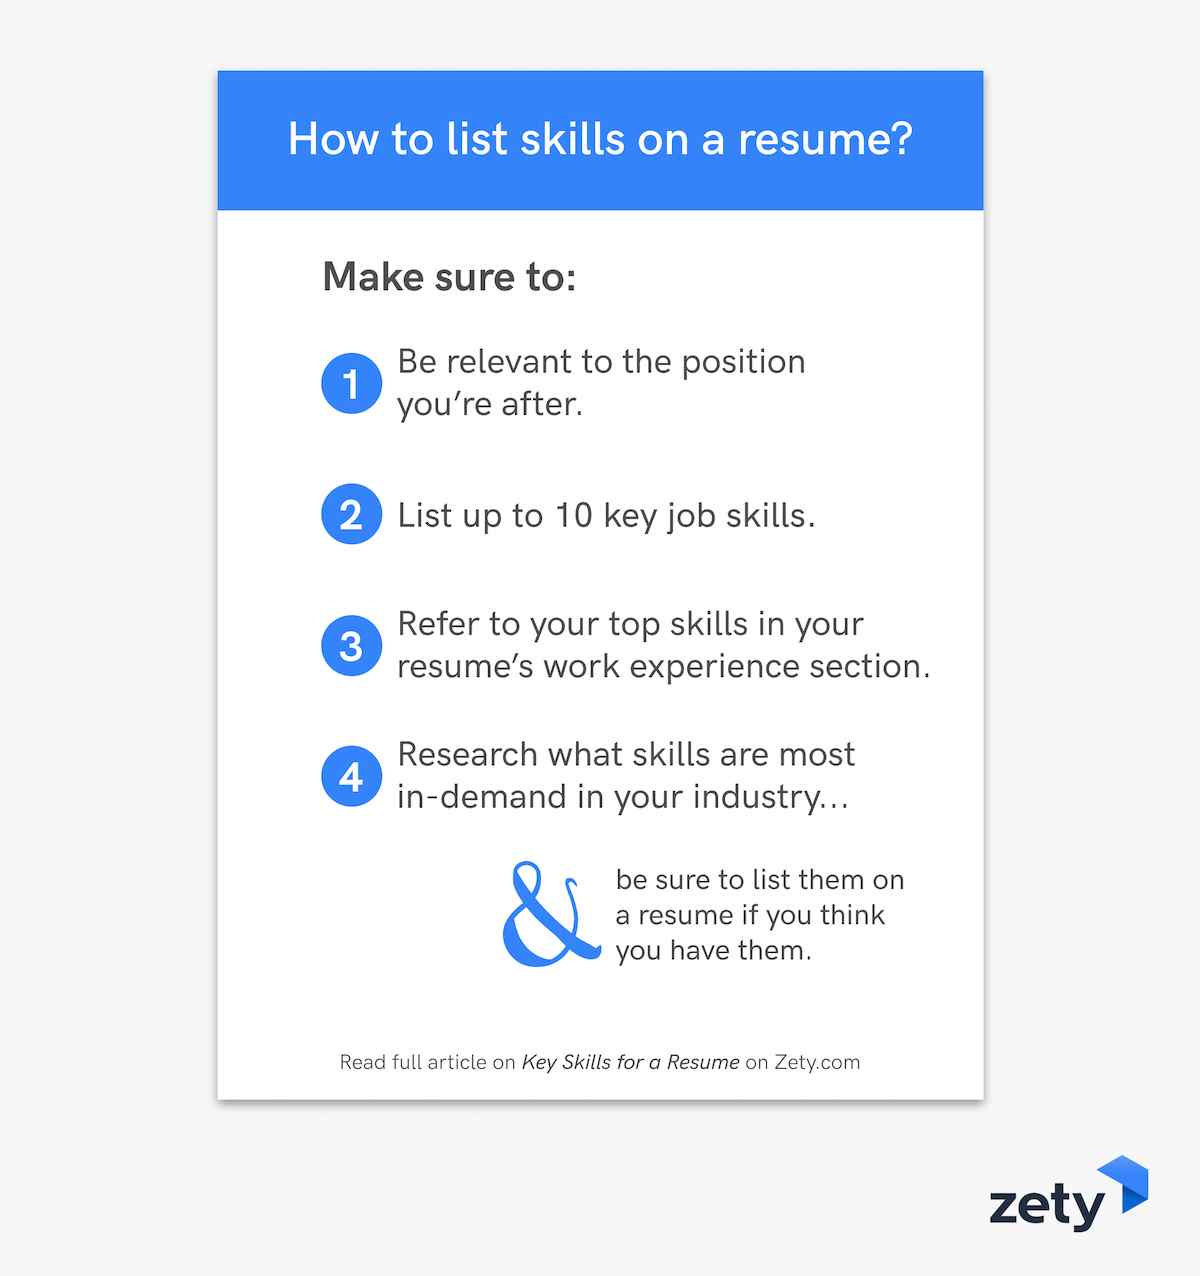 How To List Skills on a Resume